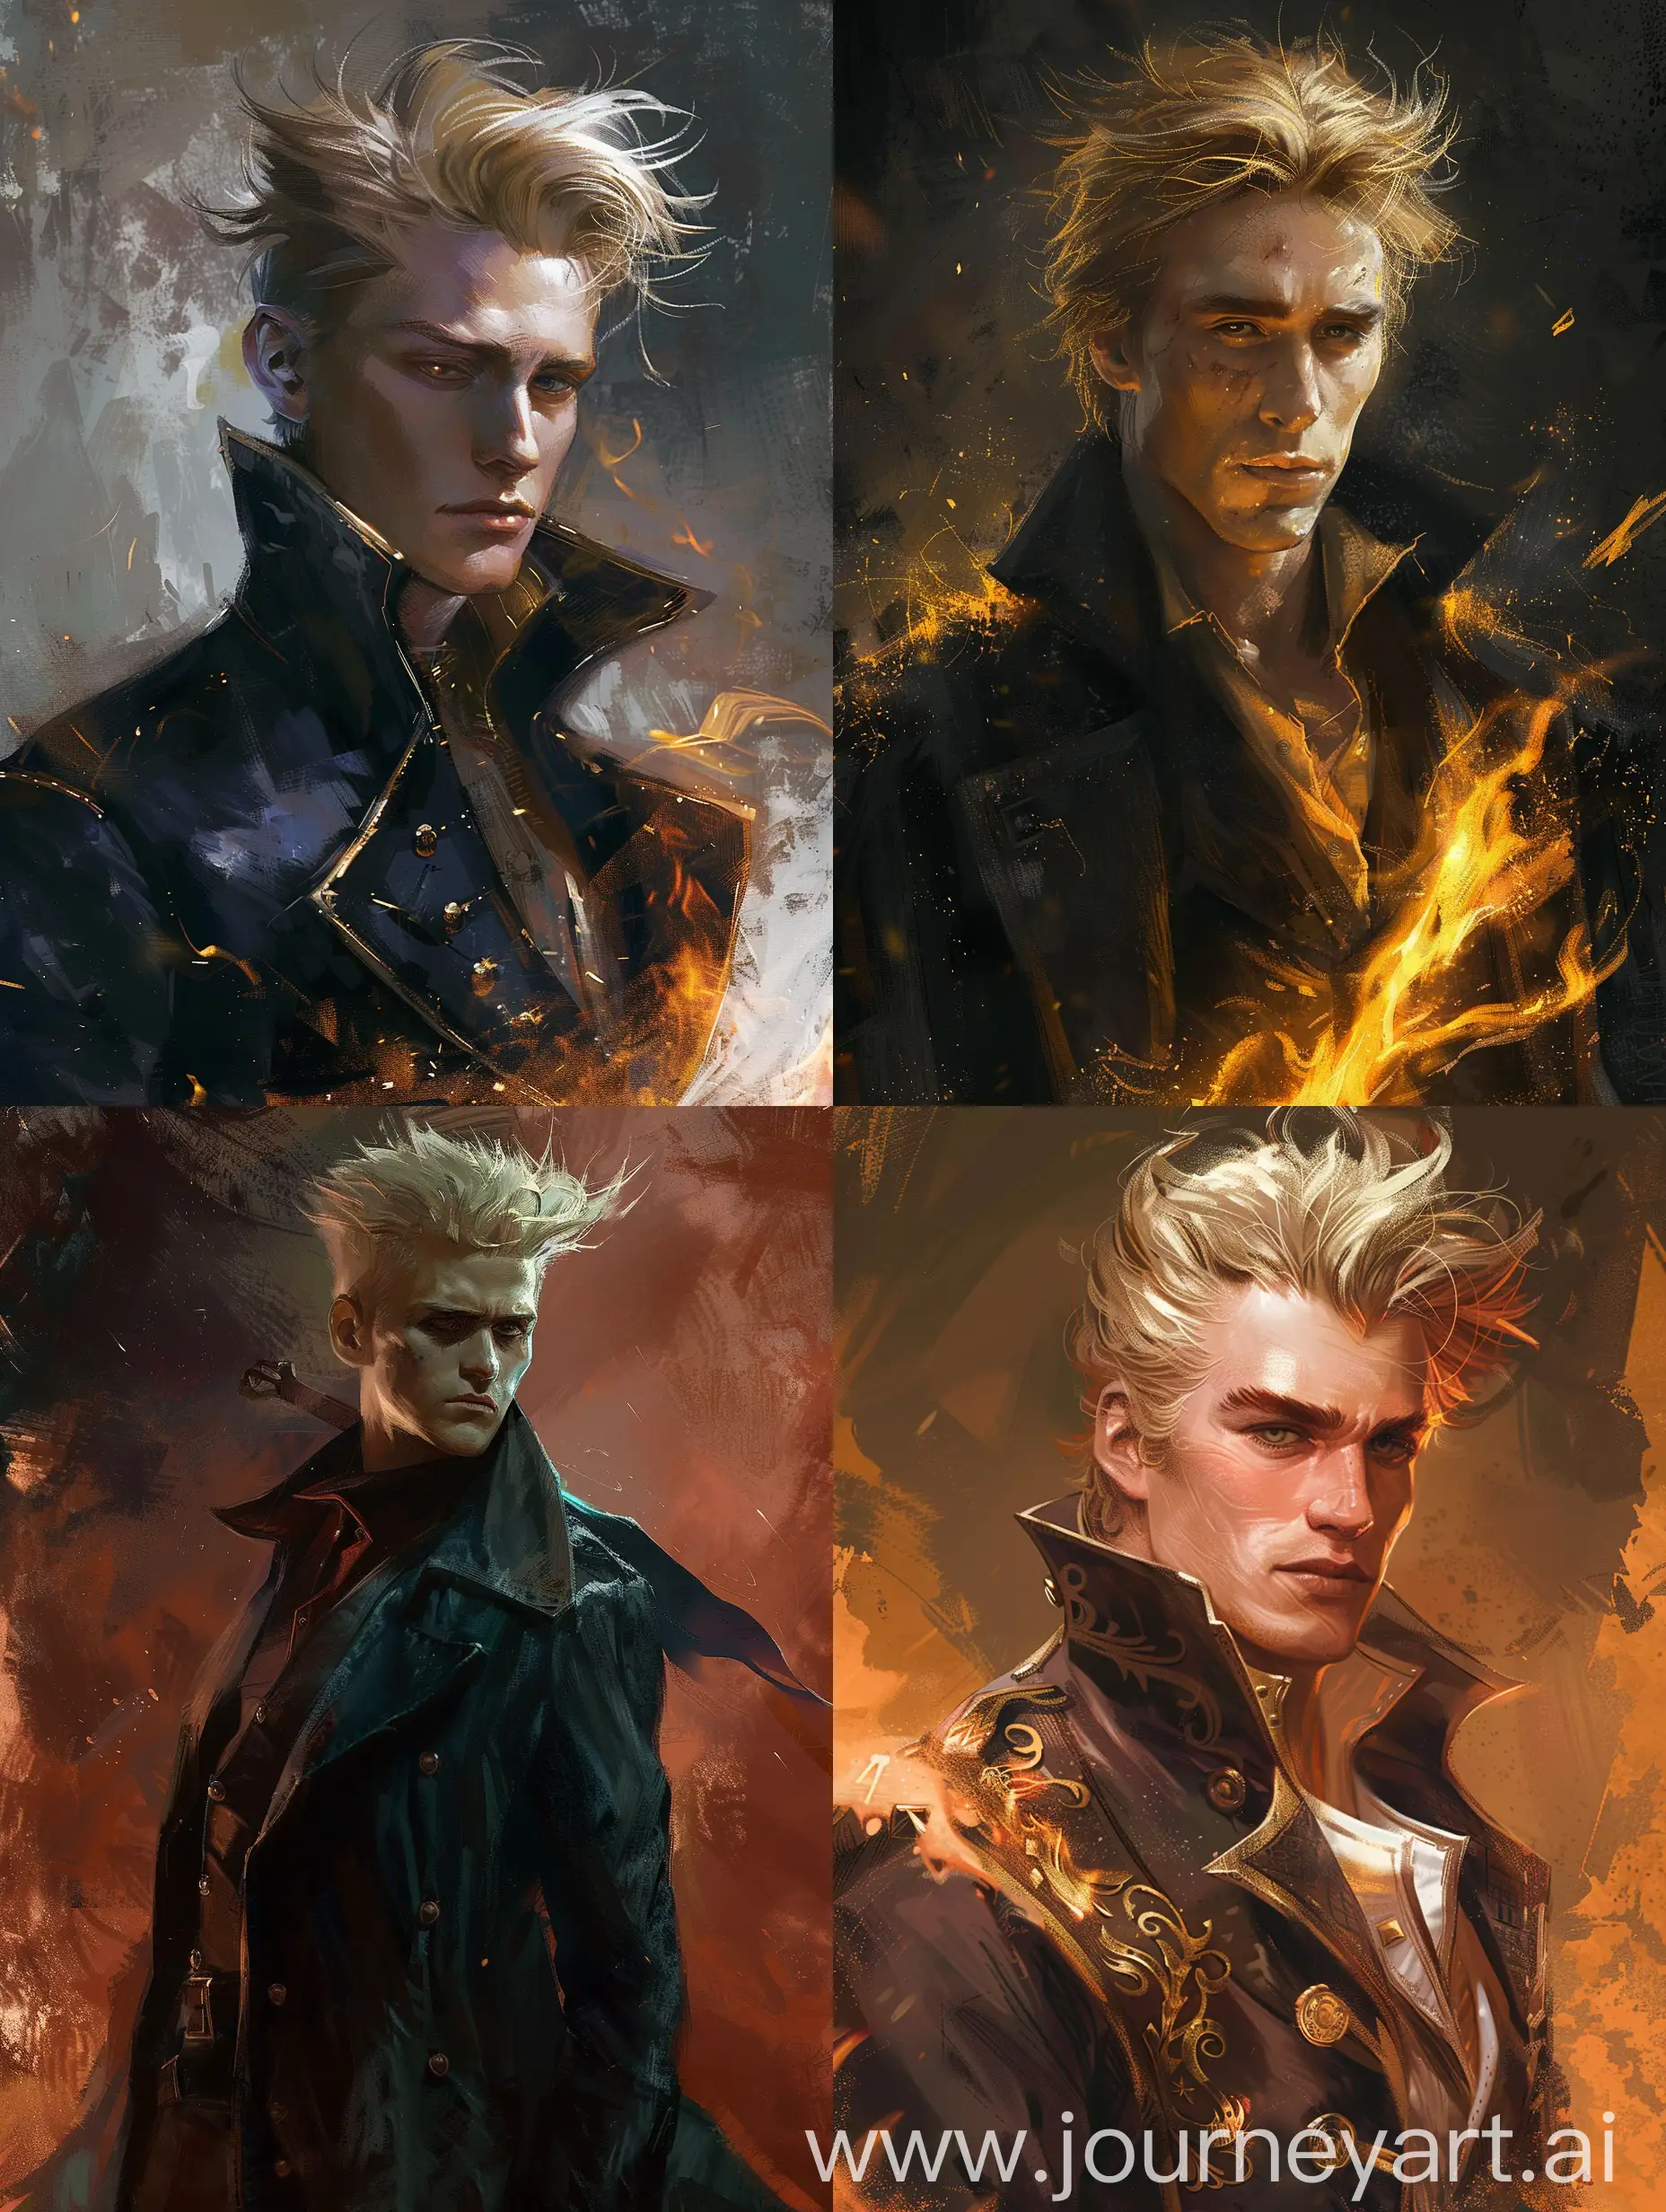 The theme and inspiration: 
• in the magical world of wizarding, where magical creatures in the universe thrive, knights, wizards, witches, and beings of science fiction exist. In this world there is a man of world breaking and dimension splitting power, his name is Gellert Grindelwald. 

Subject: he is tall, spiky blonde hair, very handsome, oozing with charisma and intellect and charm and mischief, and radiates the power of one thousand elite wizards and the fire of ten Phoenix suns. 

Waist up view of this man who tends to get mistaken for some kind of god.